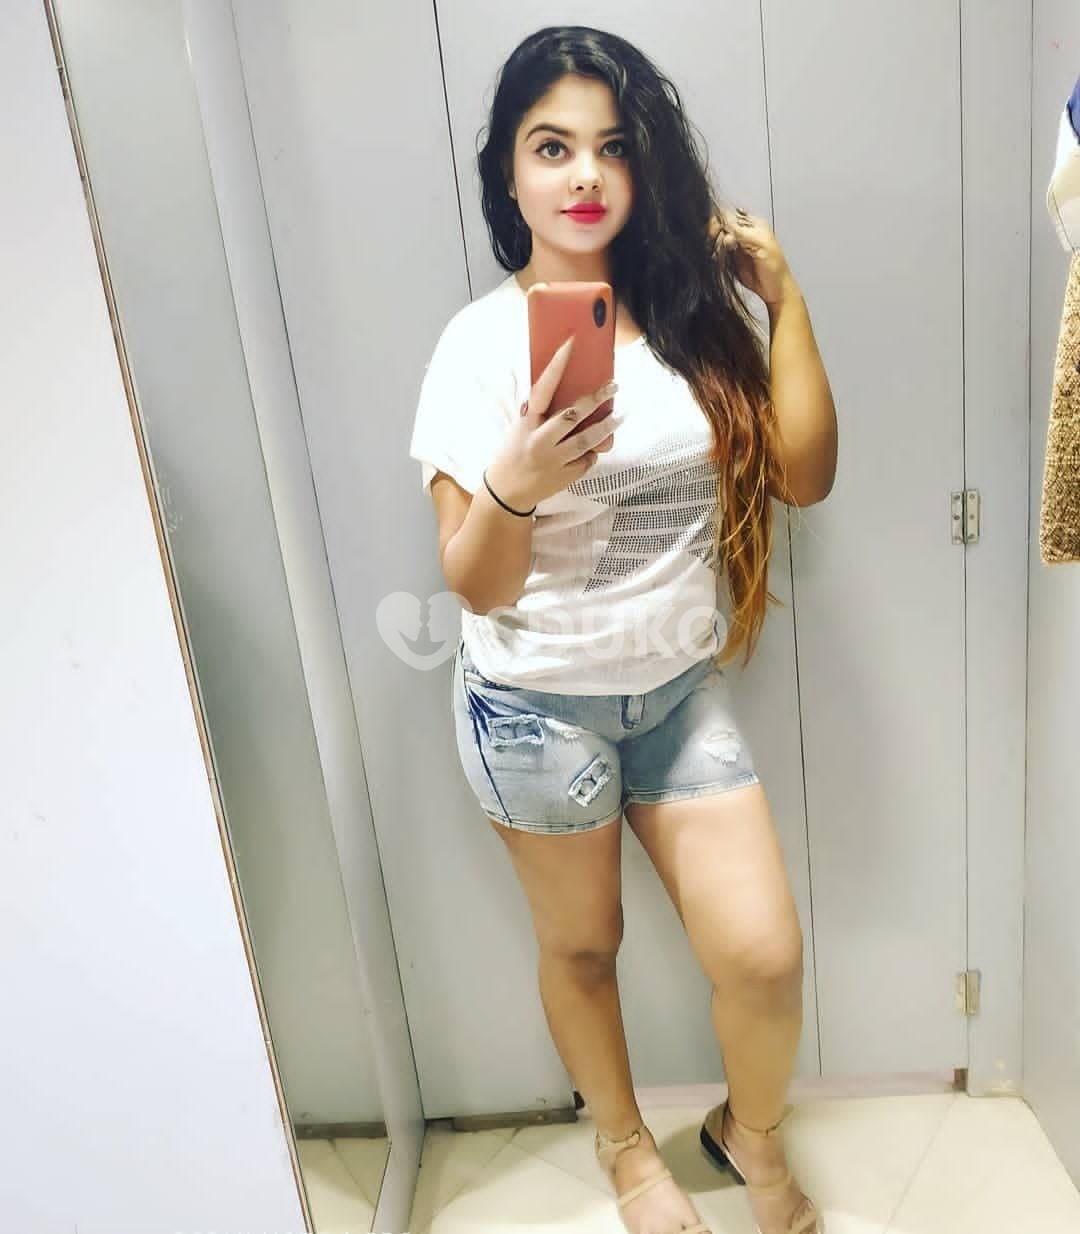 JP nagar High profile❣️🌟 college girls and aunties 24 hour available 🌟❣️full safe and secure service